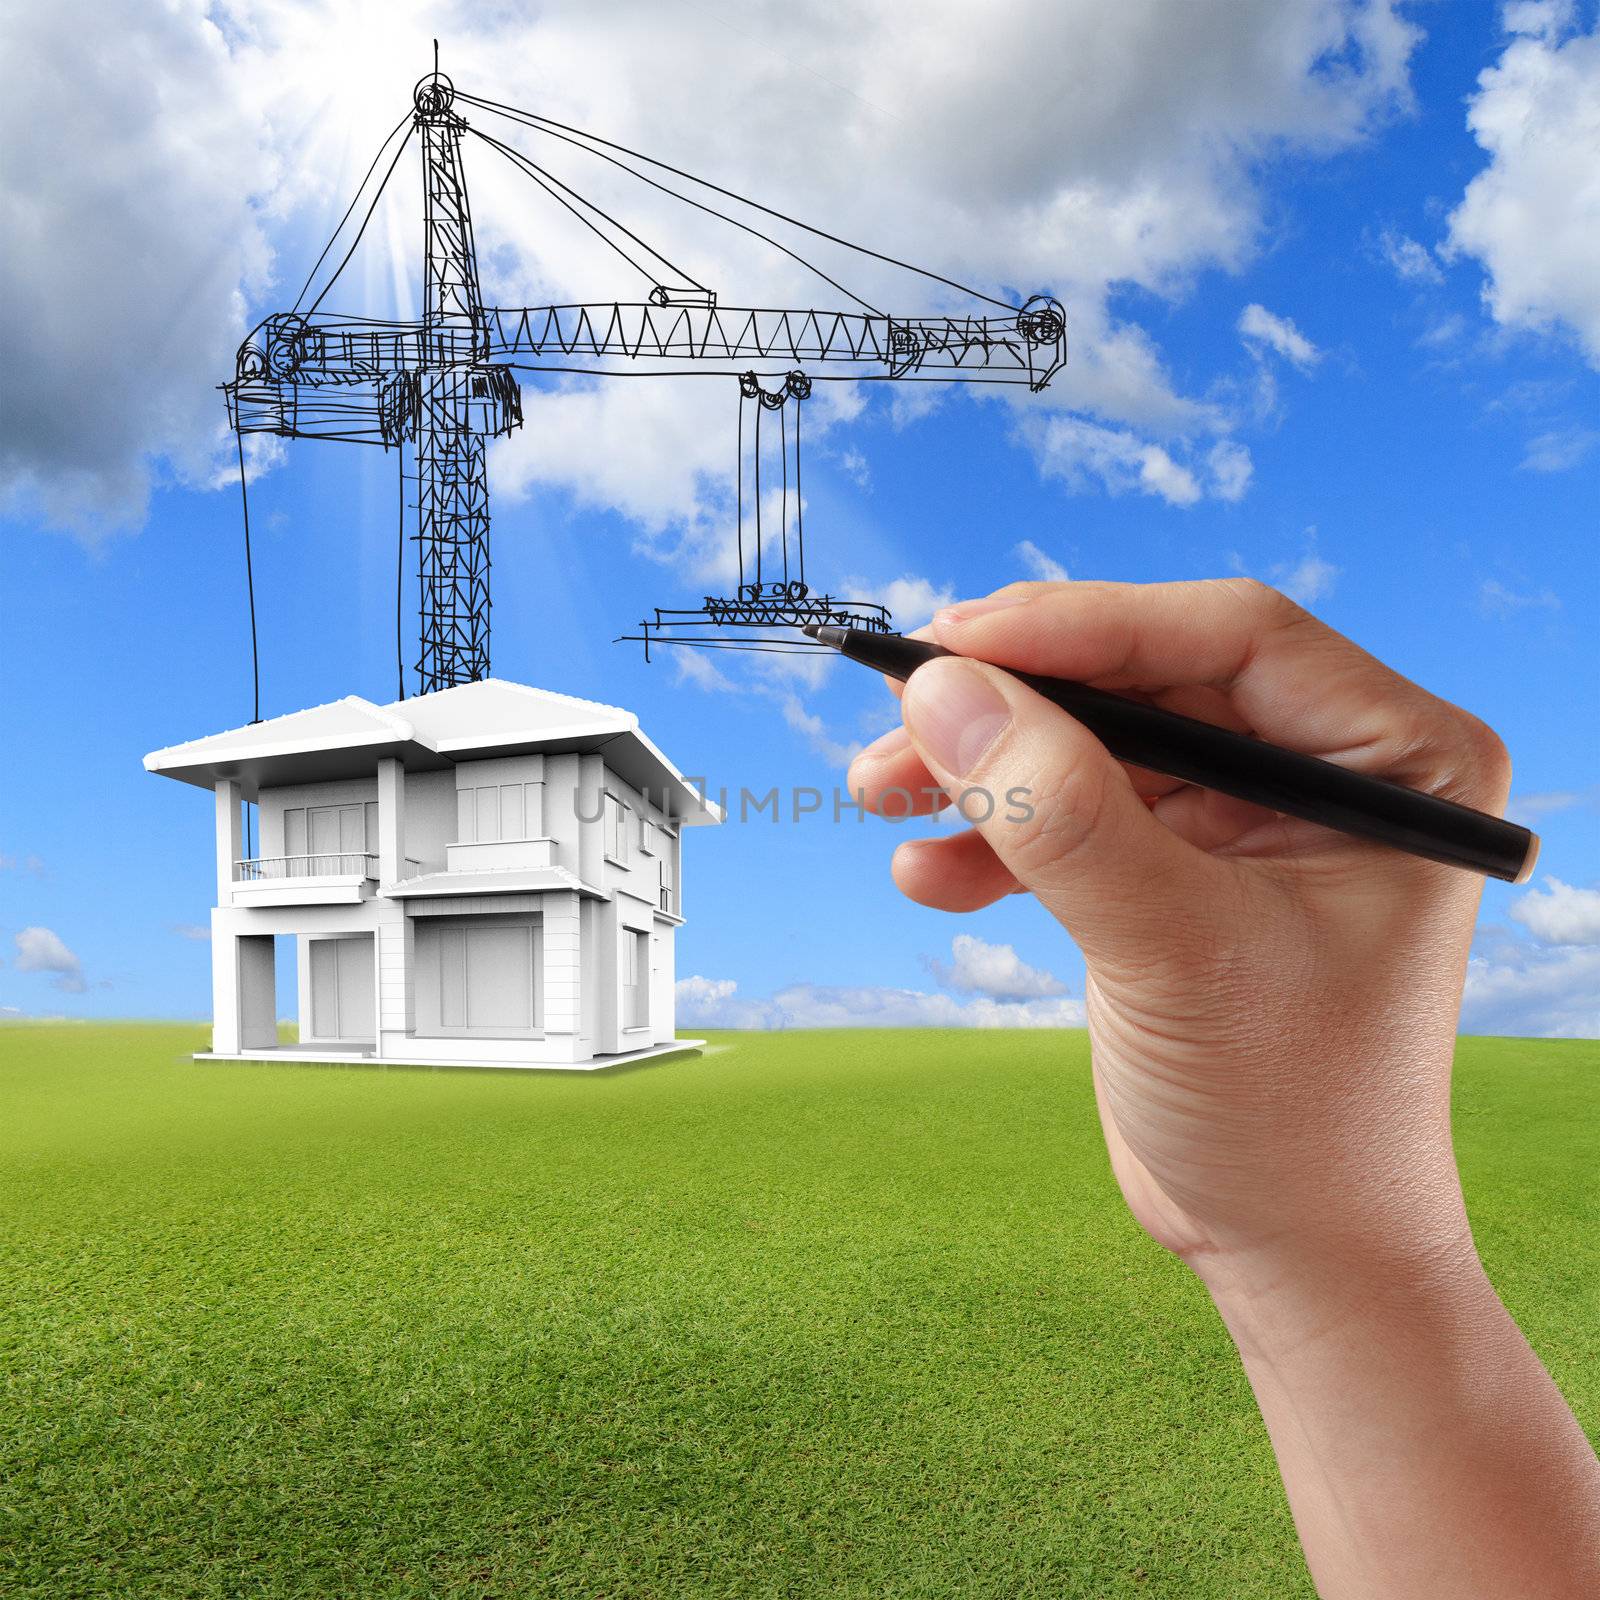 house building and cranes by hand drawn